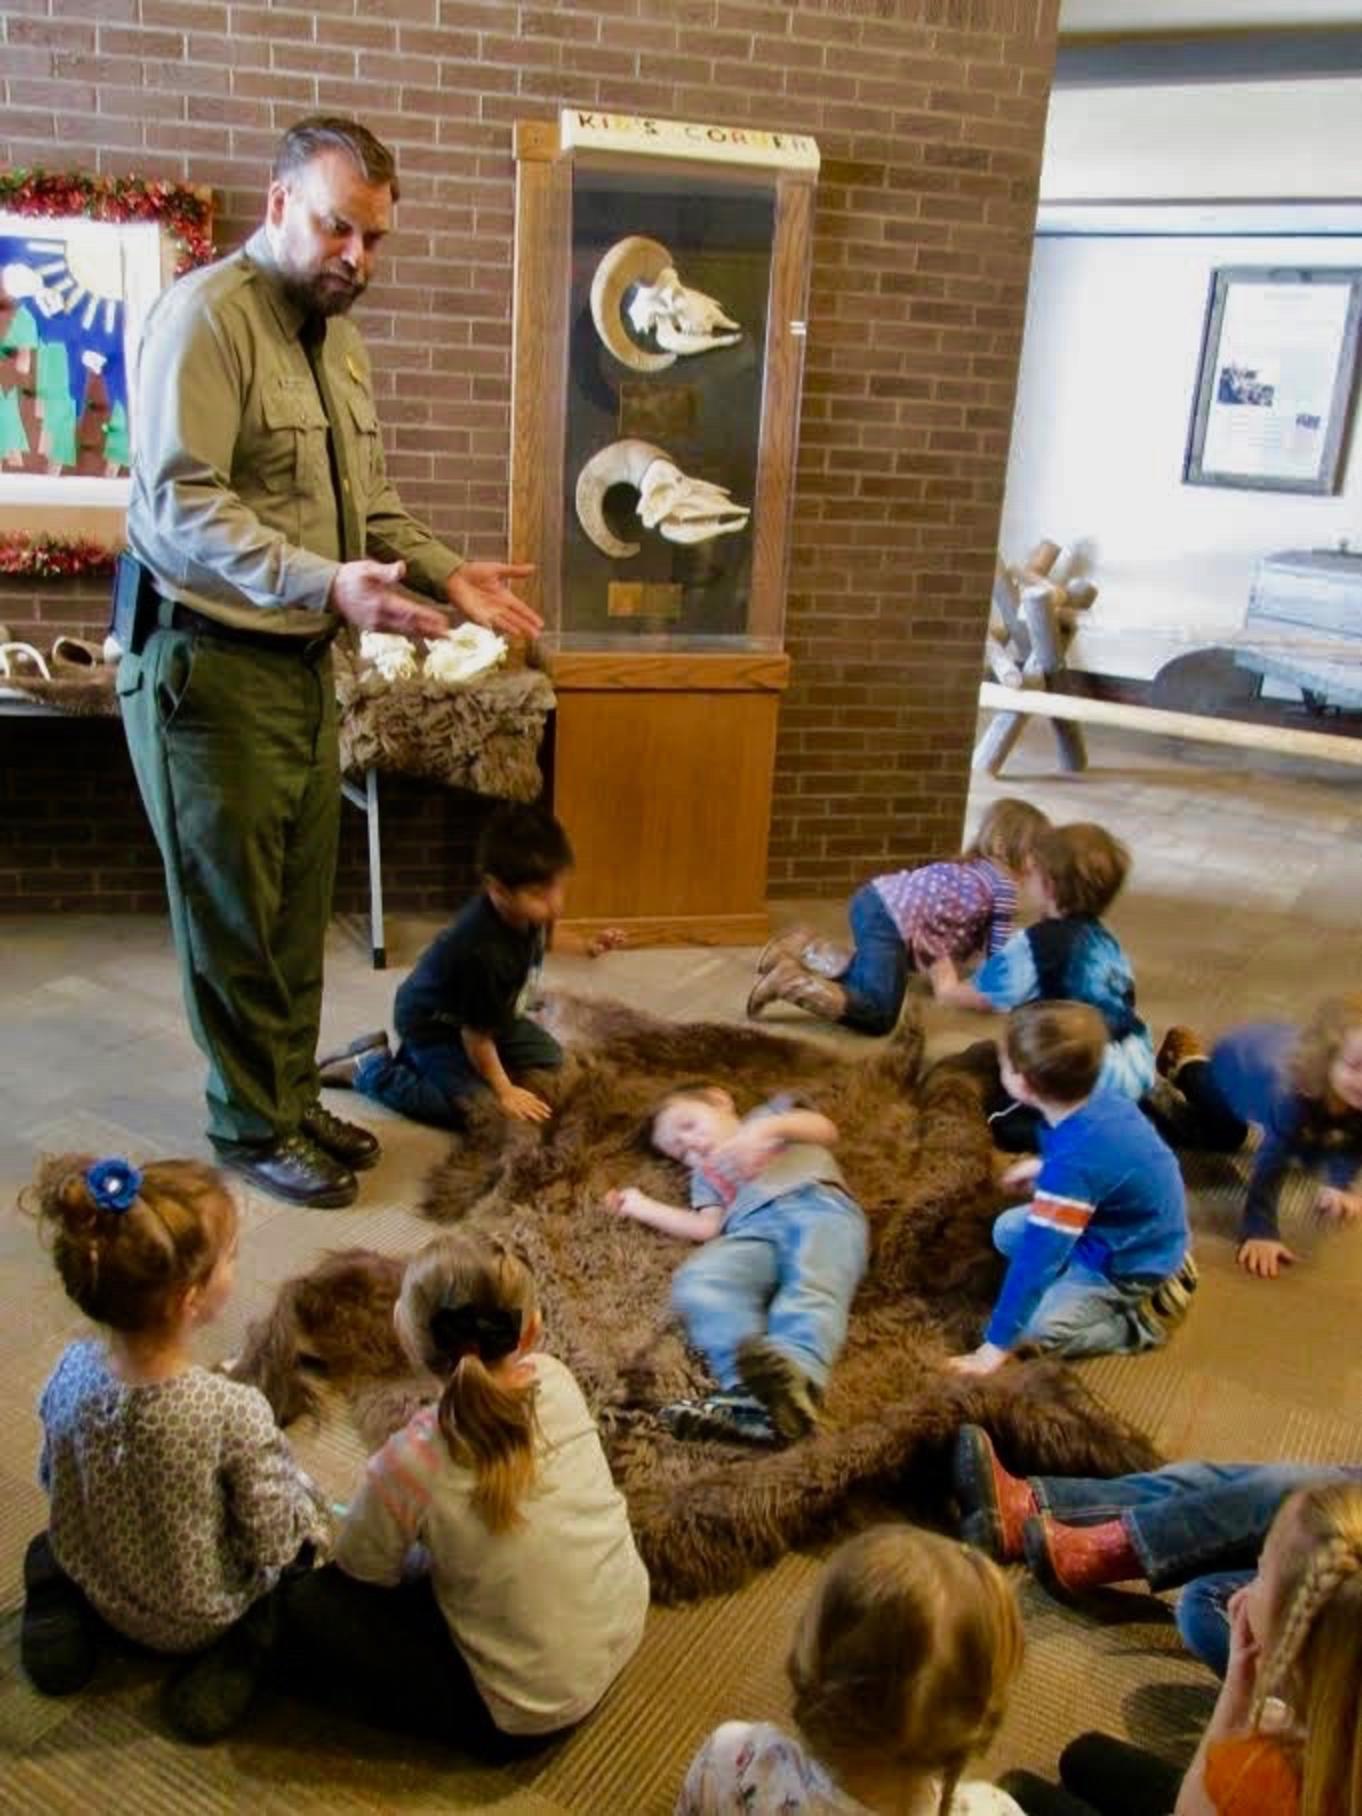 As important as his military career was, Johnson takes his mission on the homefront equally as seriously. Here he's educating local school kids about wildlife, hoping to infect them with what E..O. Wilson calls 